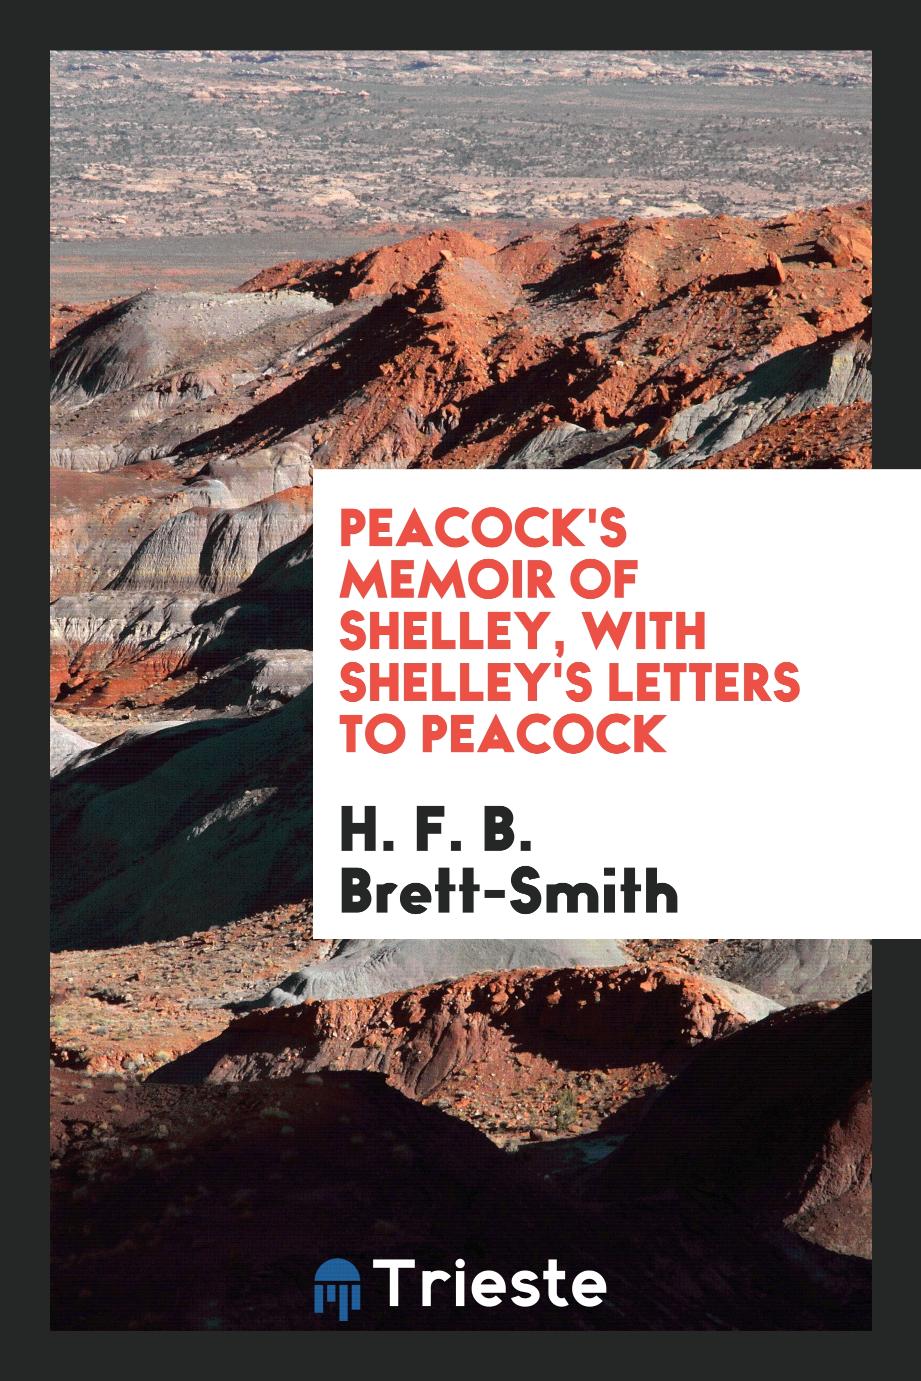 Peacock's memoir of Shelley, with Shelley's letters to Peacock